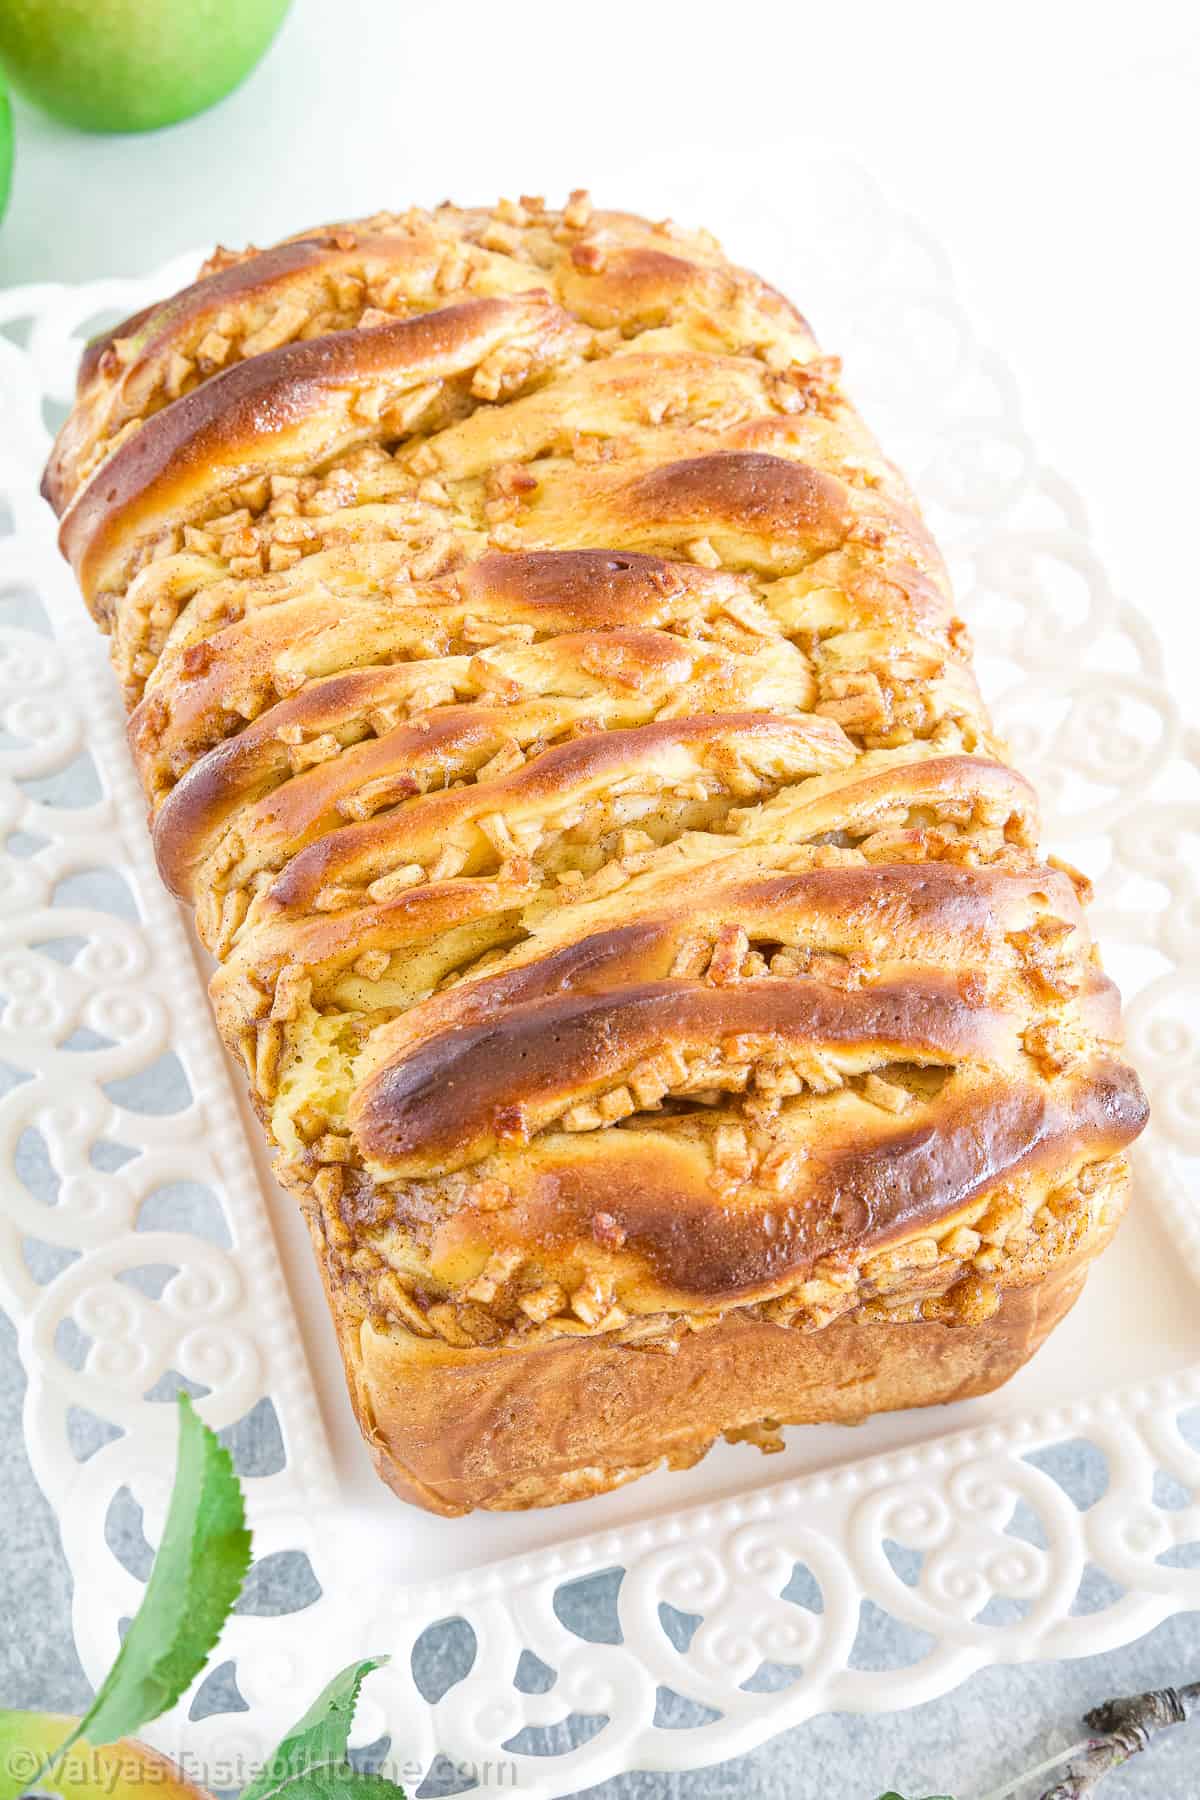 This apple fritter bread is truly a delicious and satisfying dish that combines the flavors of apples, cinnamon, and sweetness in a moist and tender bread.